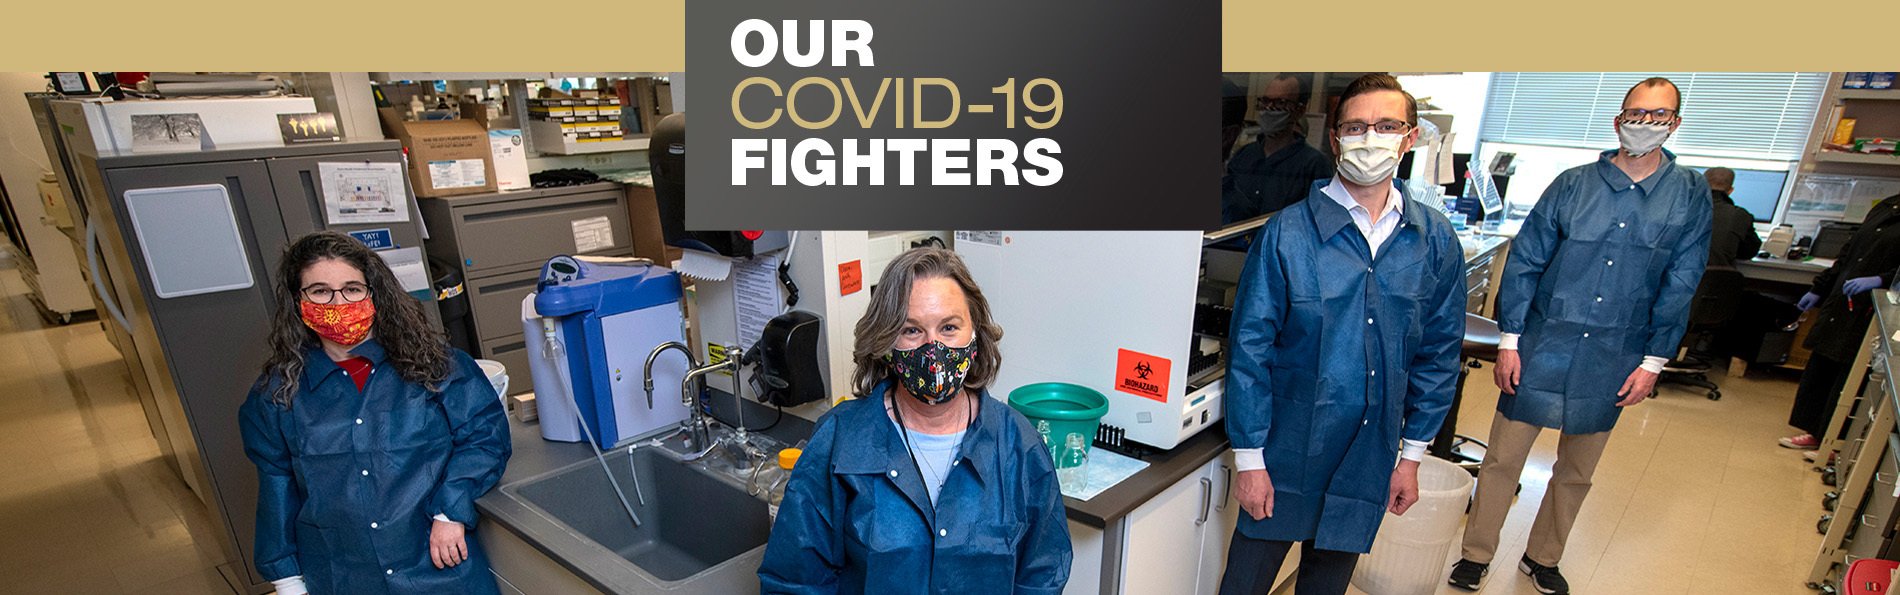 5_20_COM-Our-Covid-Fighter-Banner-Roundup